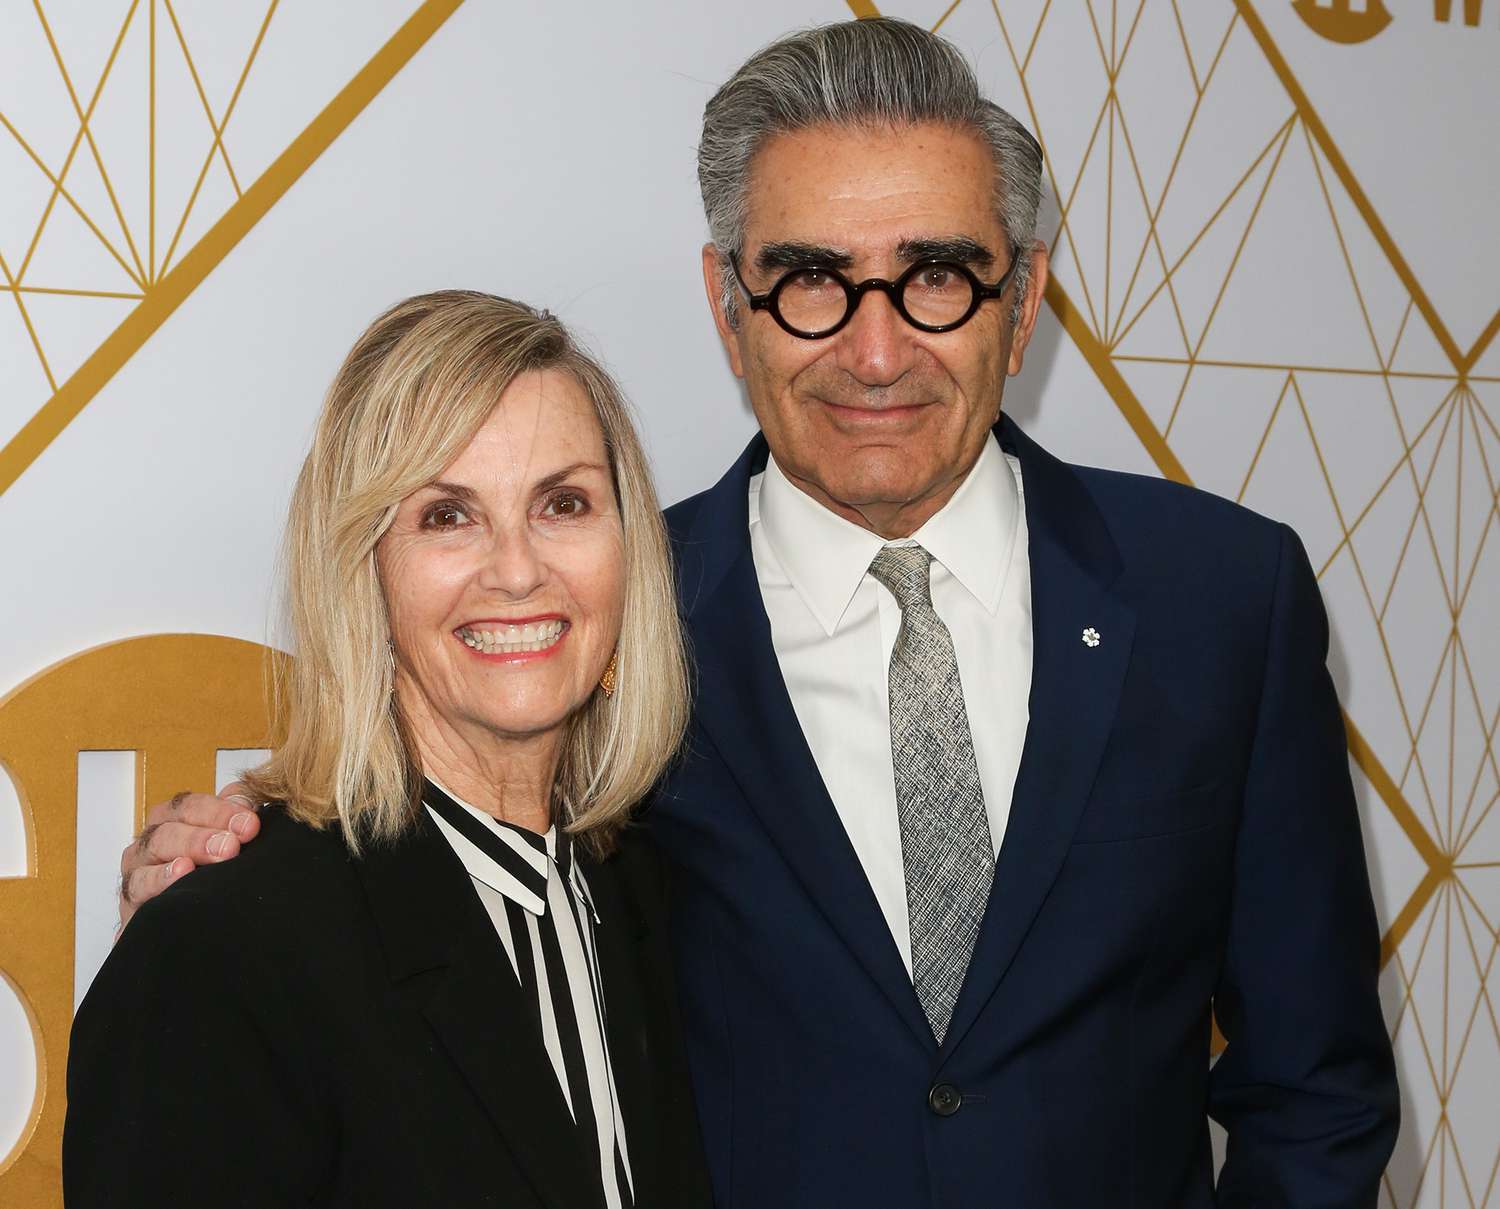 Eugene Levy (R) and his Wife Deborah Divine (L) attend the Showtime Emmy eve nominees celebrations at San Vincente Bungalows on September 21, 2019 in West Hollywood, California